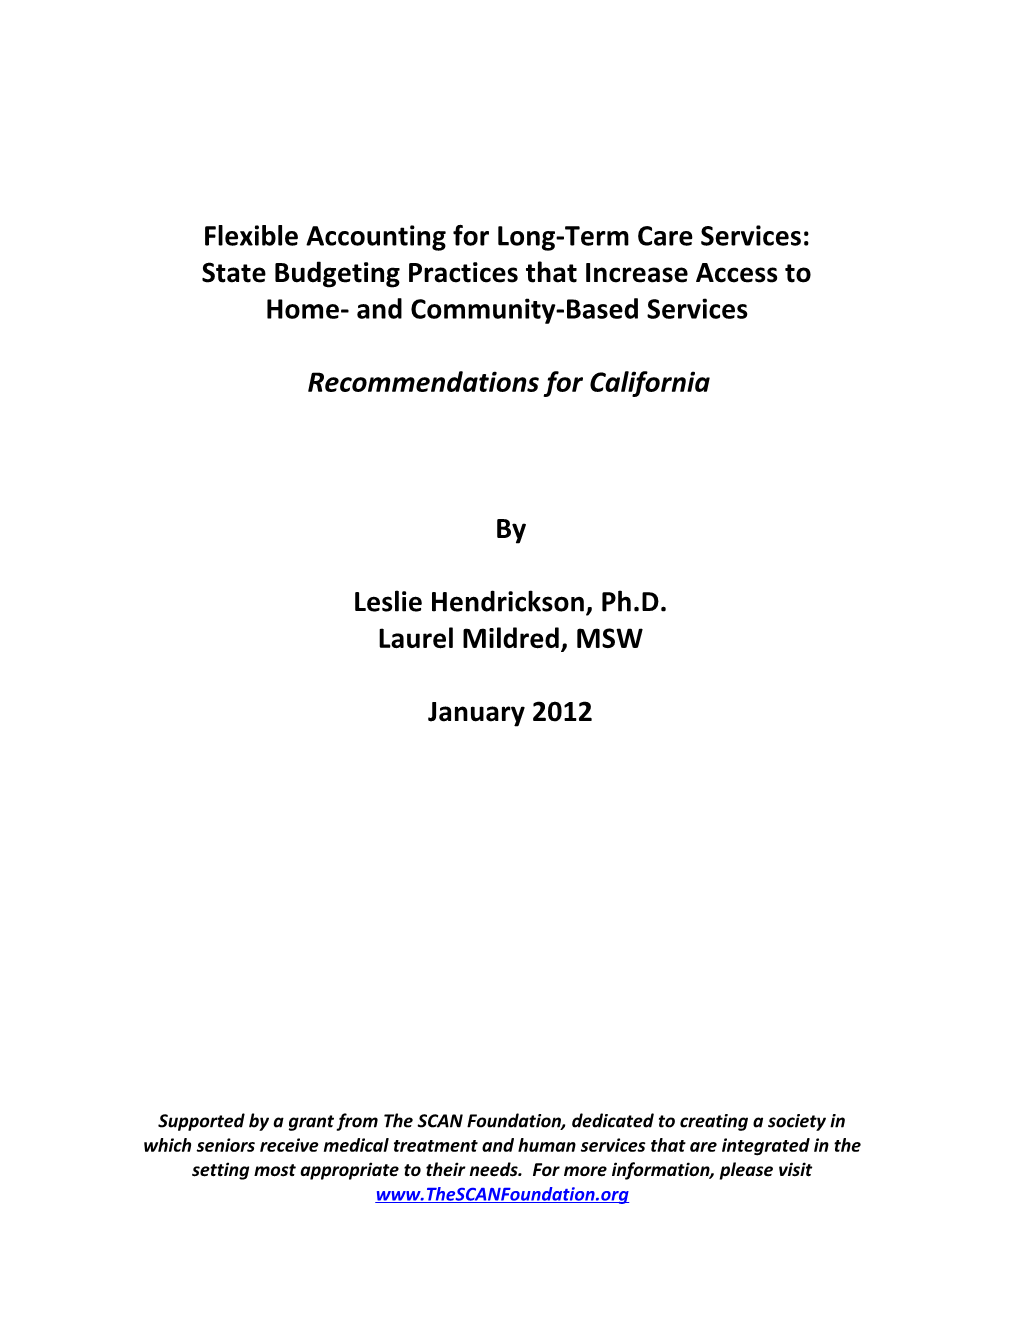 Flexible Accounting for Long-Term Care Services